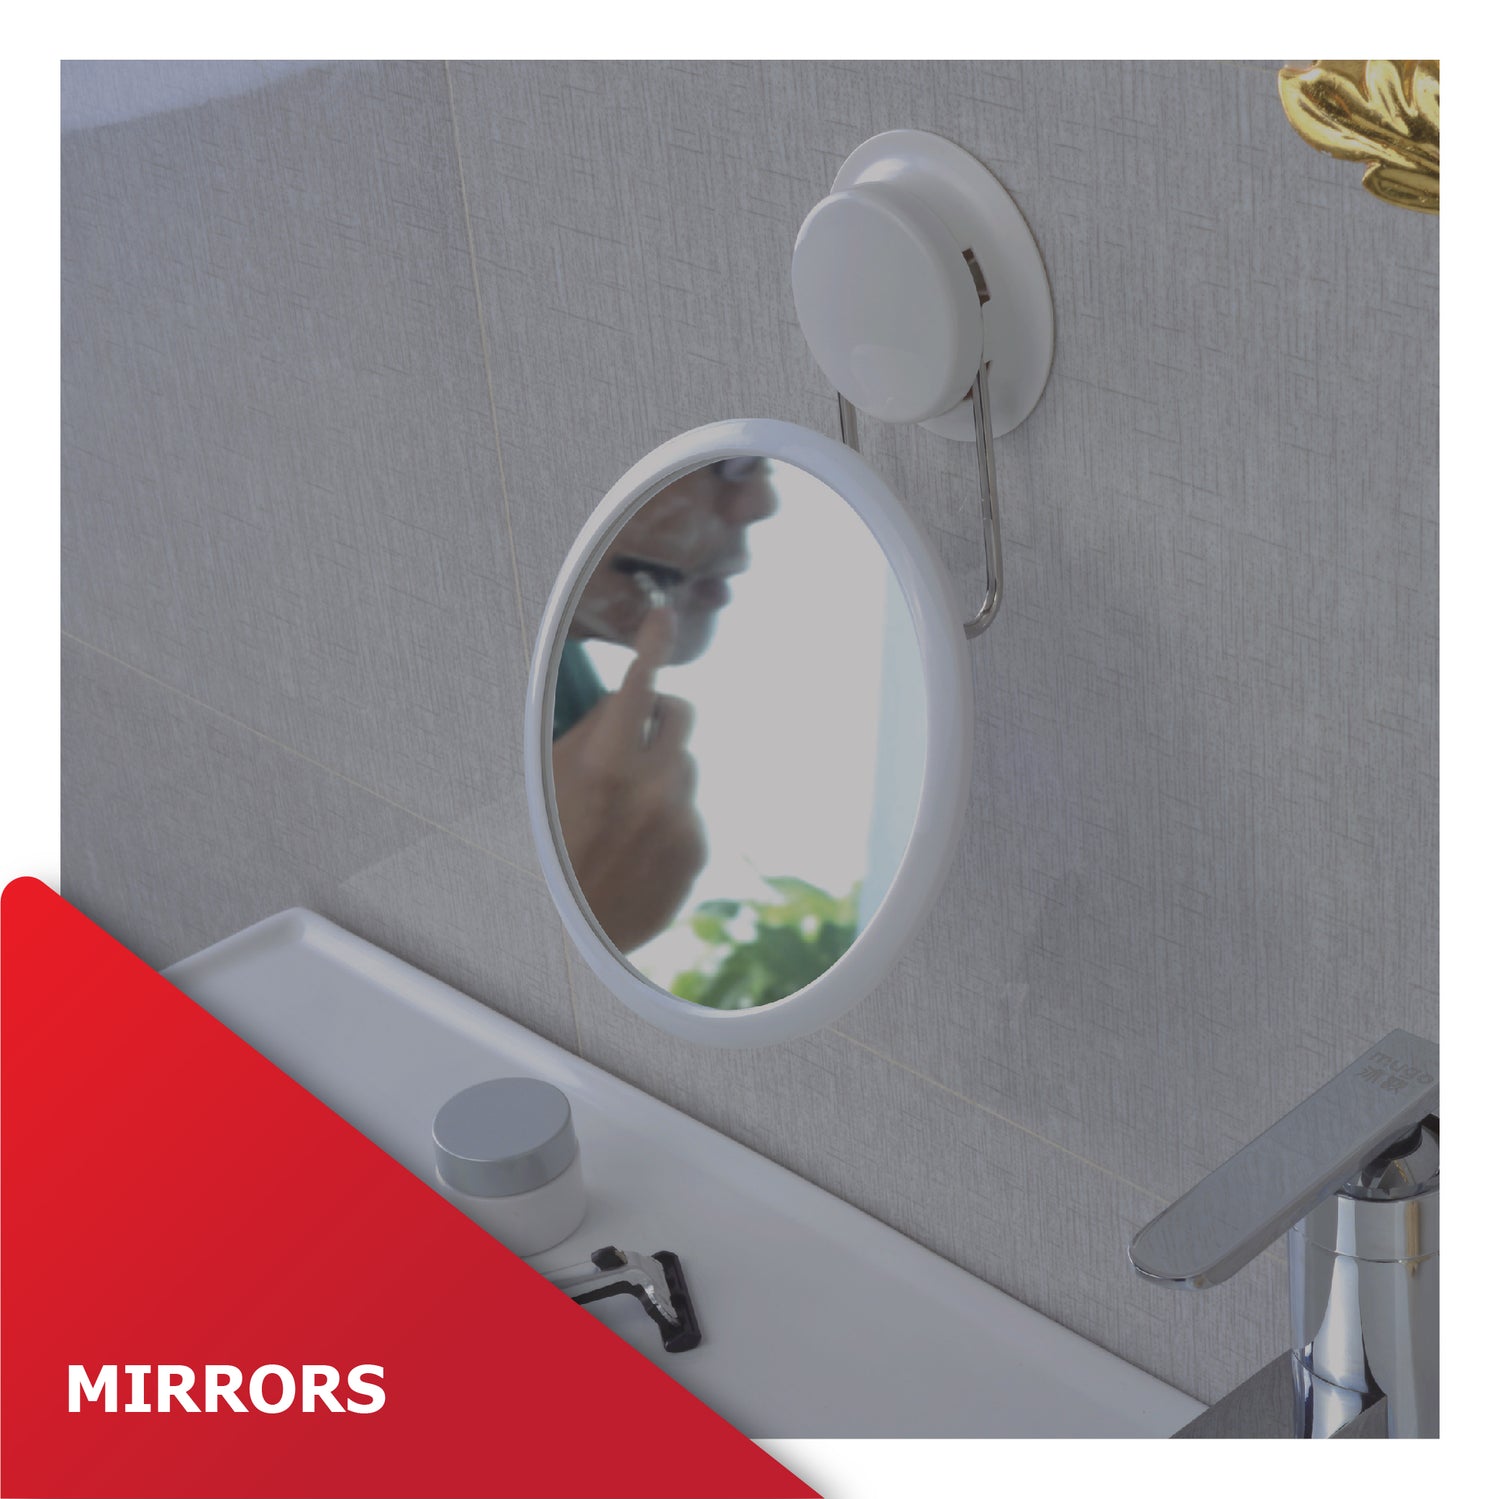 Mirrors Covers - Decorative and Functional Mirror Accessories - M. M. Noorbhoy & Co